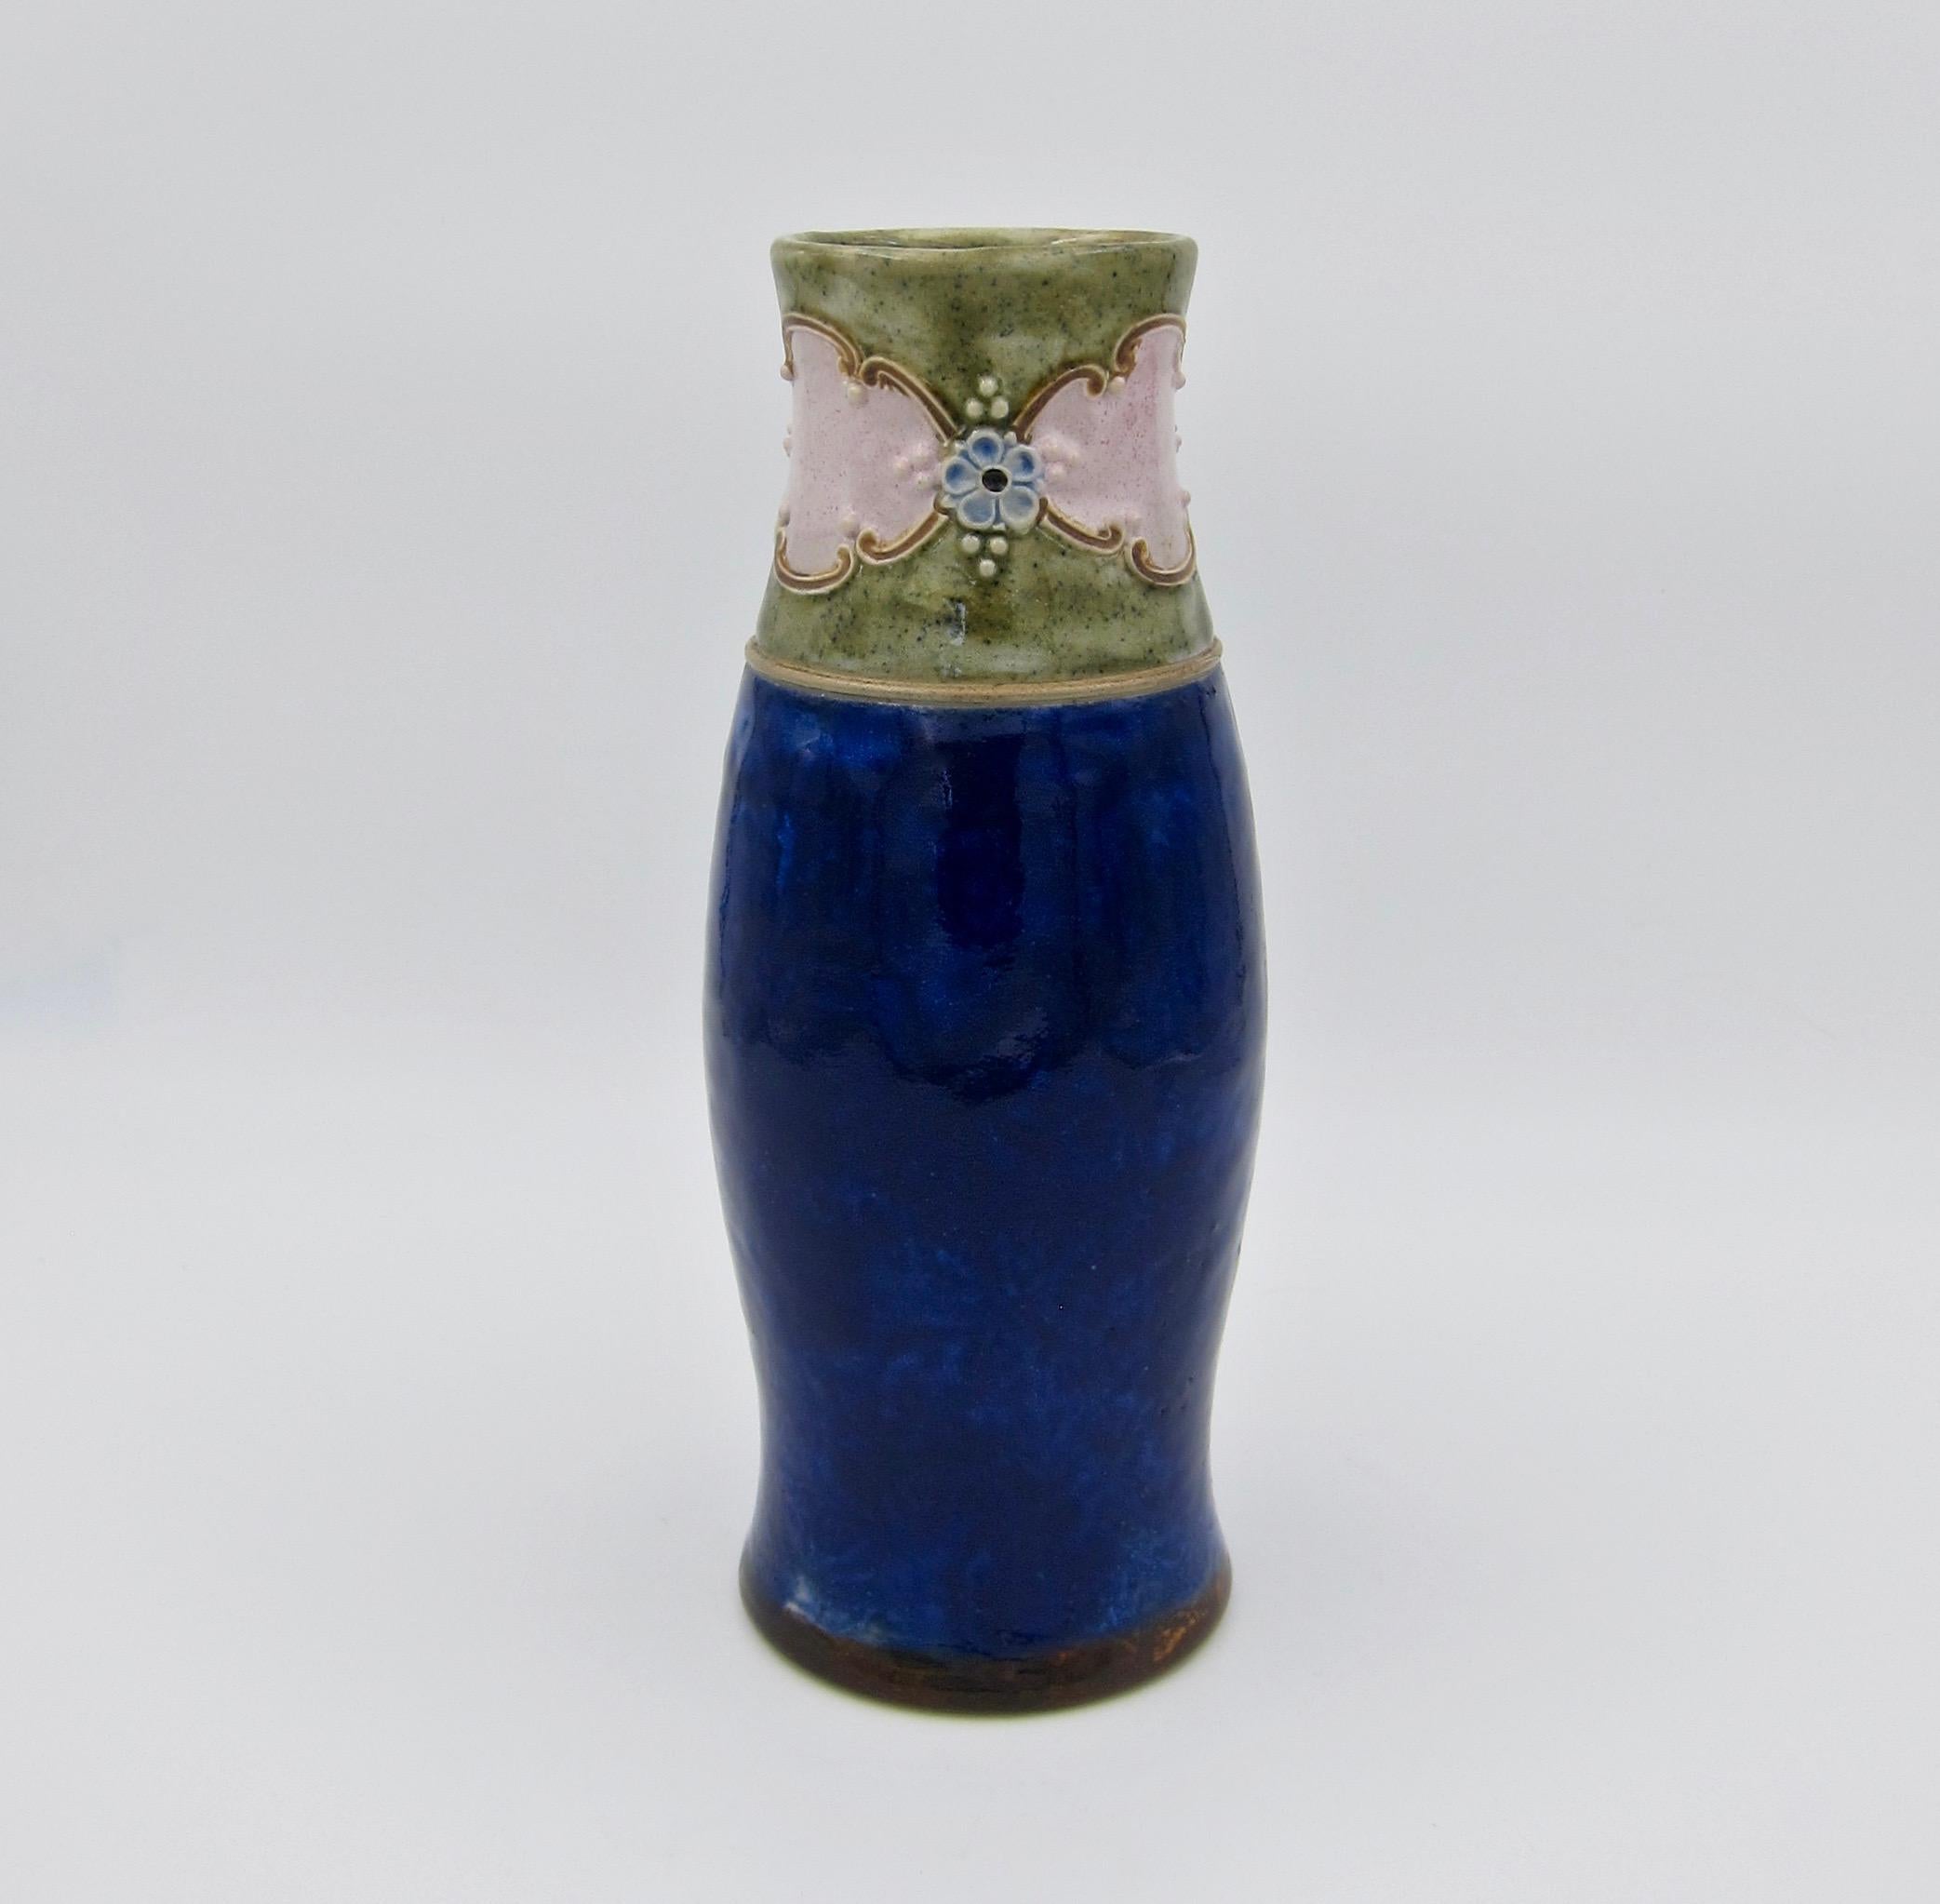 Ceramic Early 20th Century Royal Doulton Hand Painted Stoneware Vase by Emily MR Welch